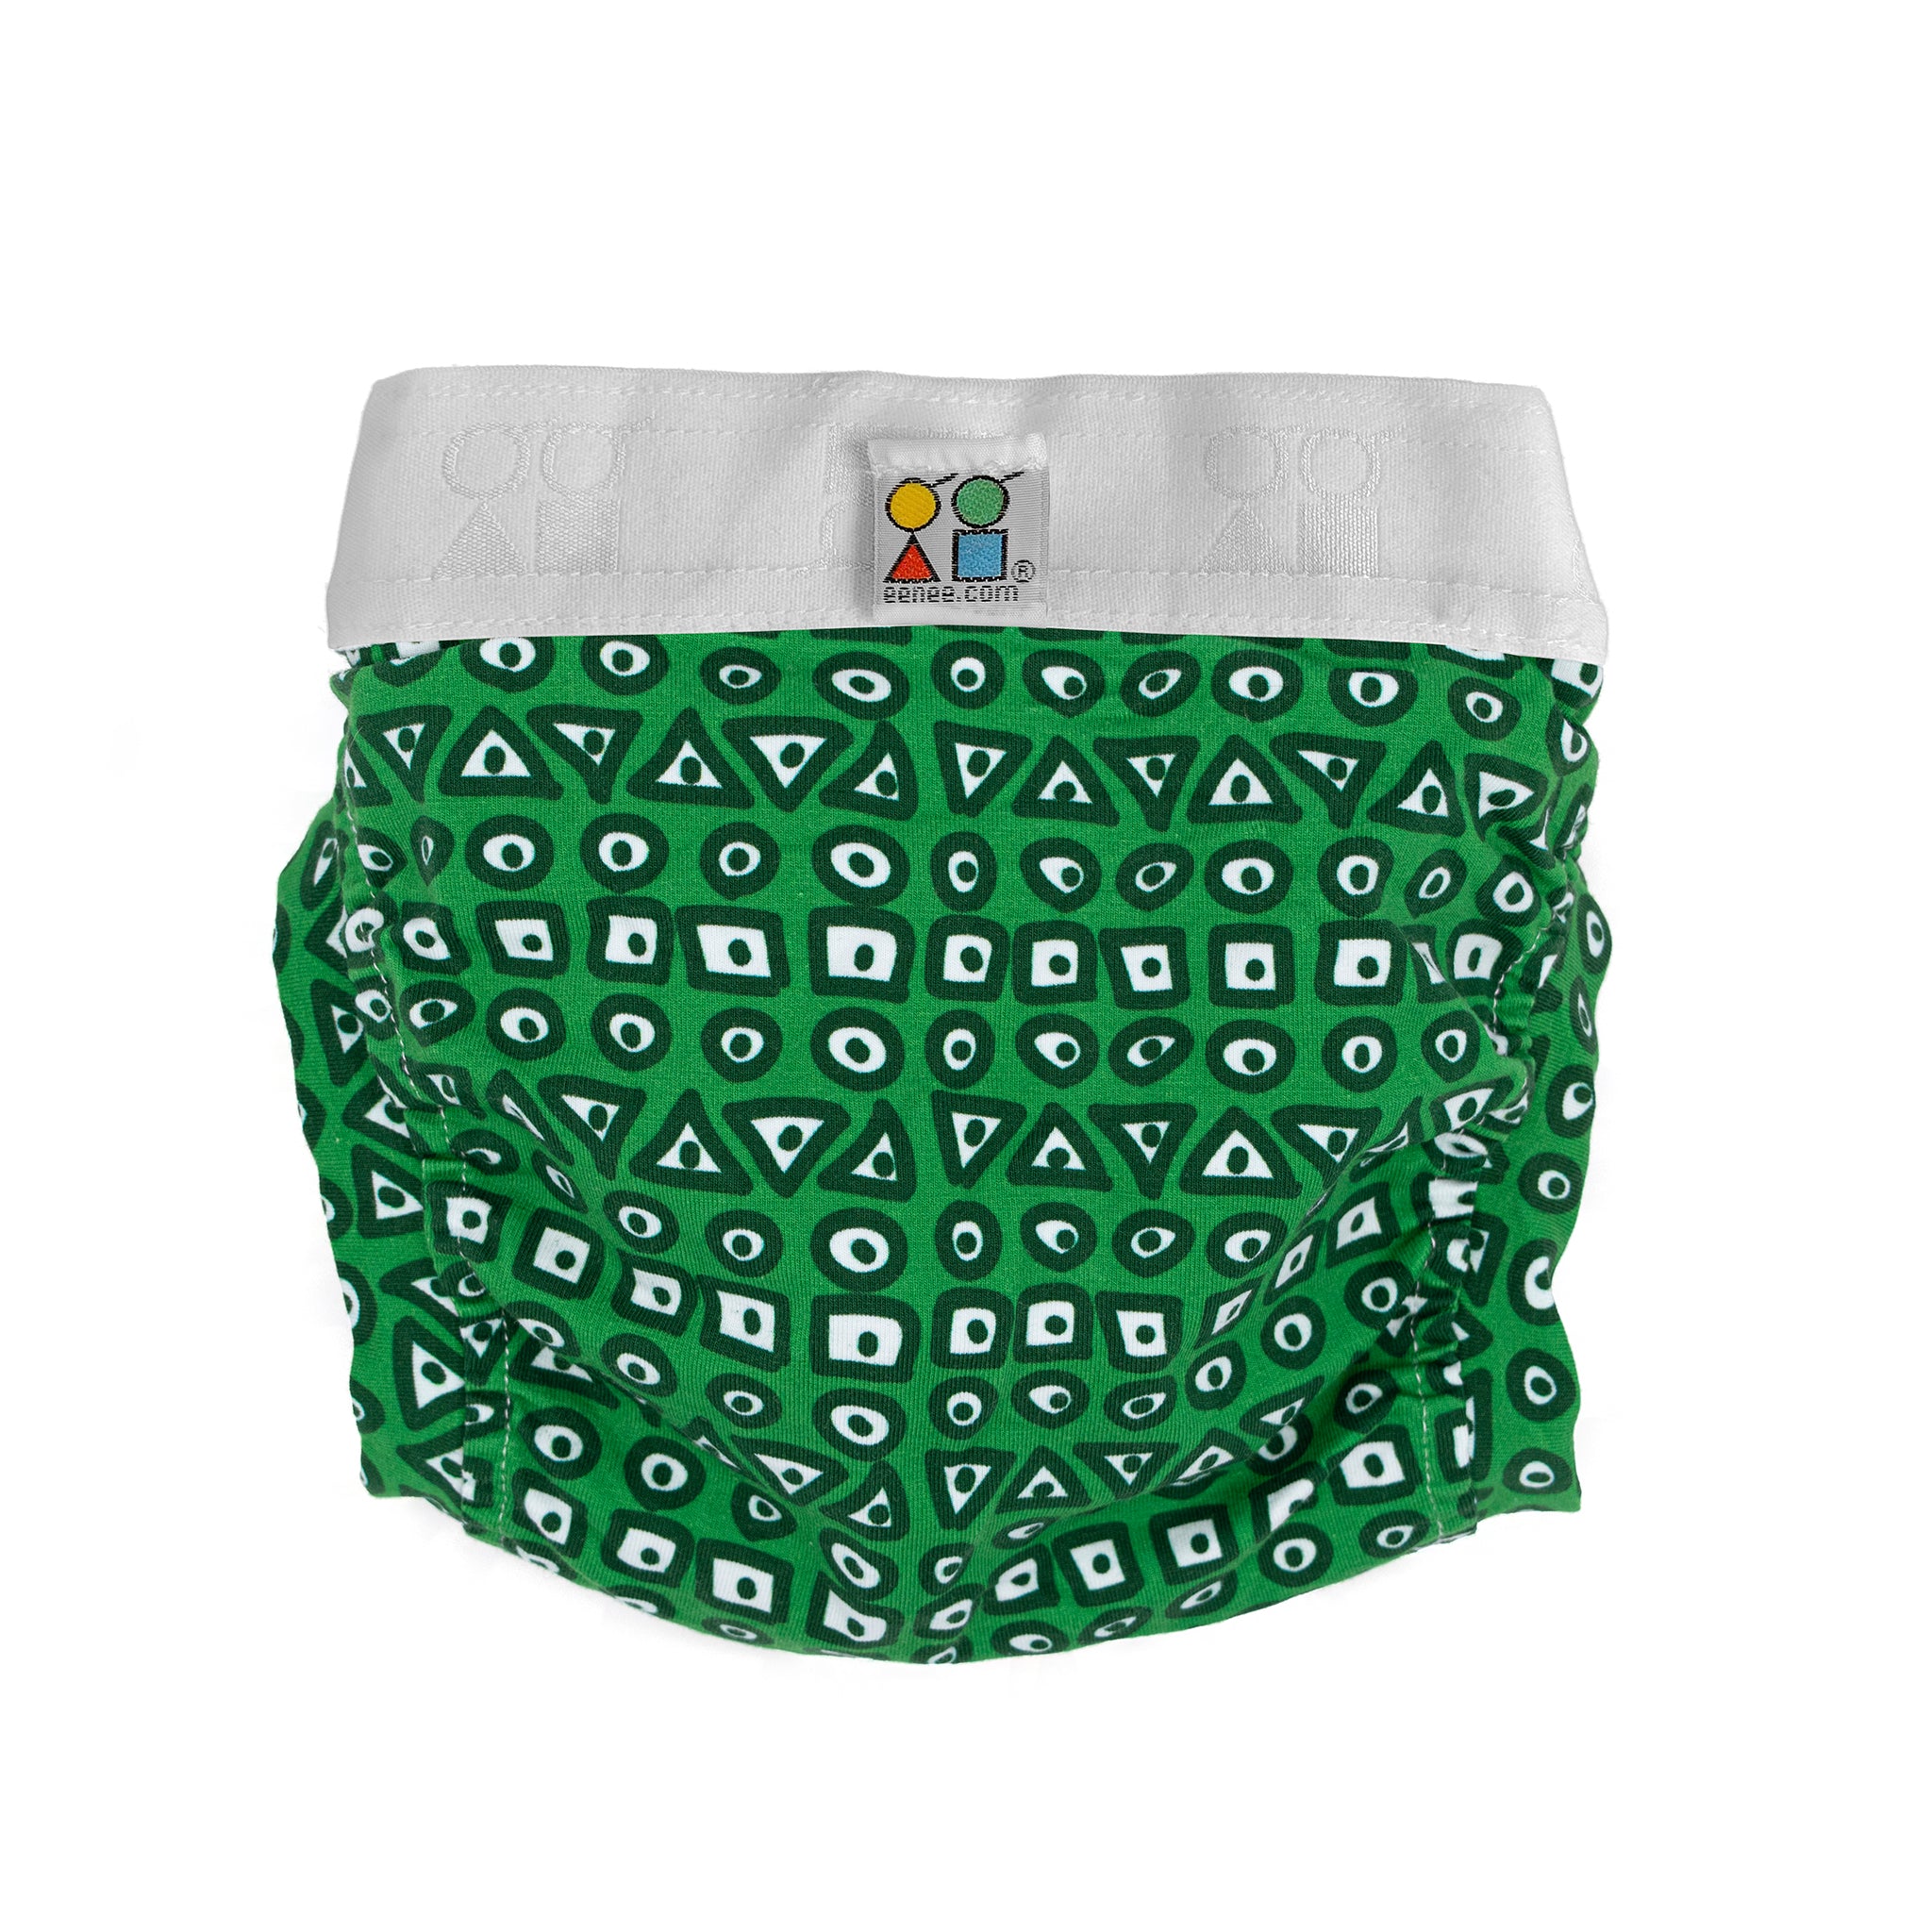 Bright green design on nappy pants in small medium and large sizes